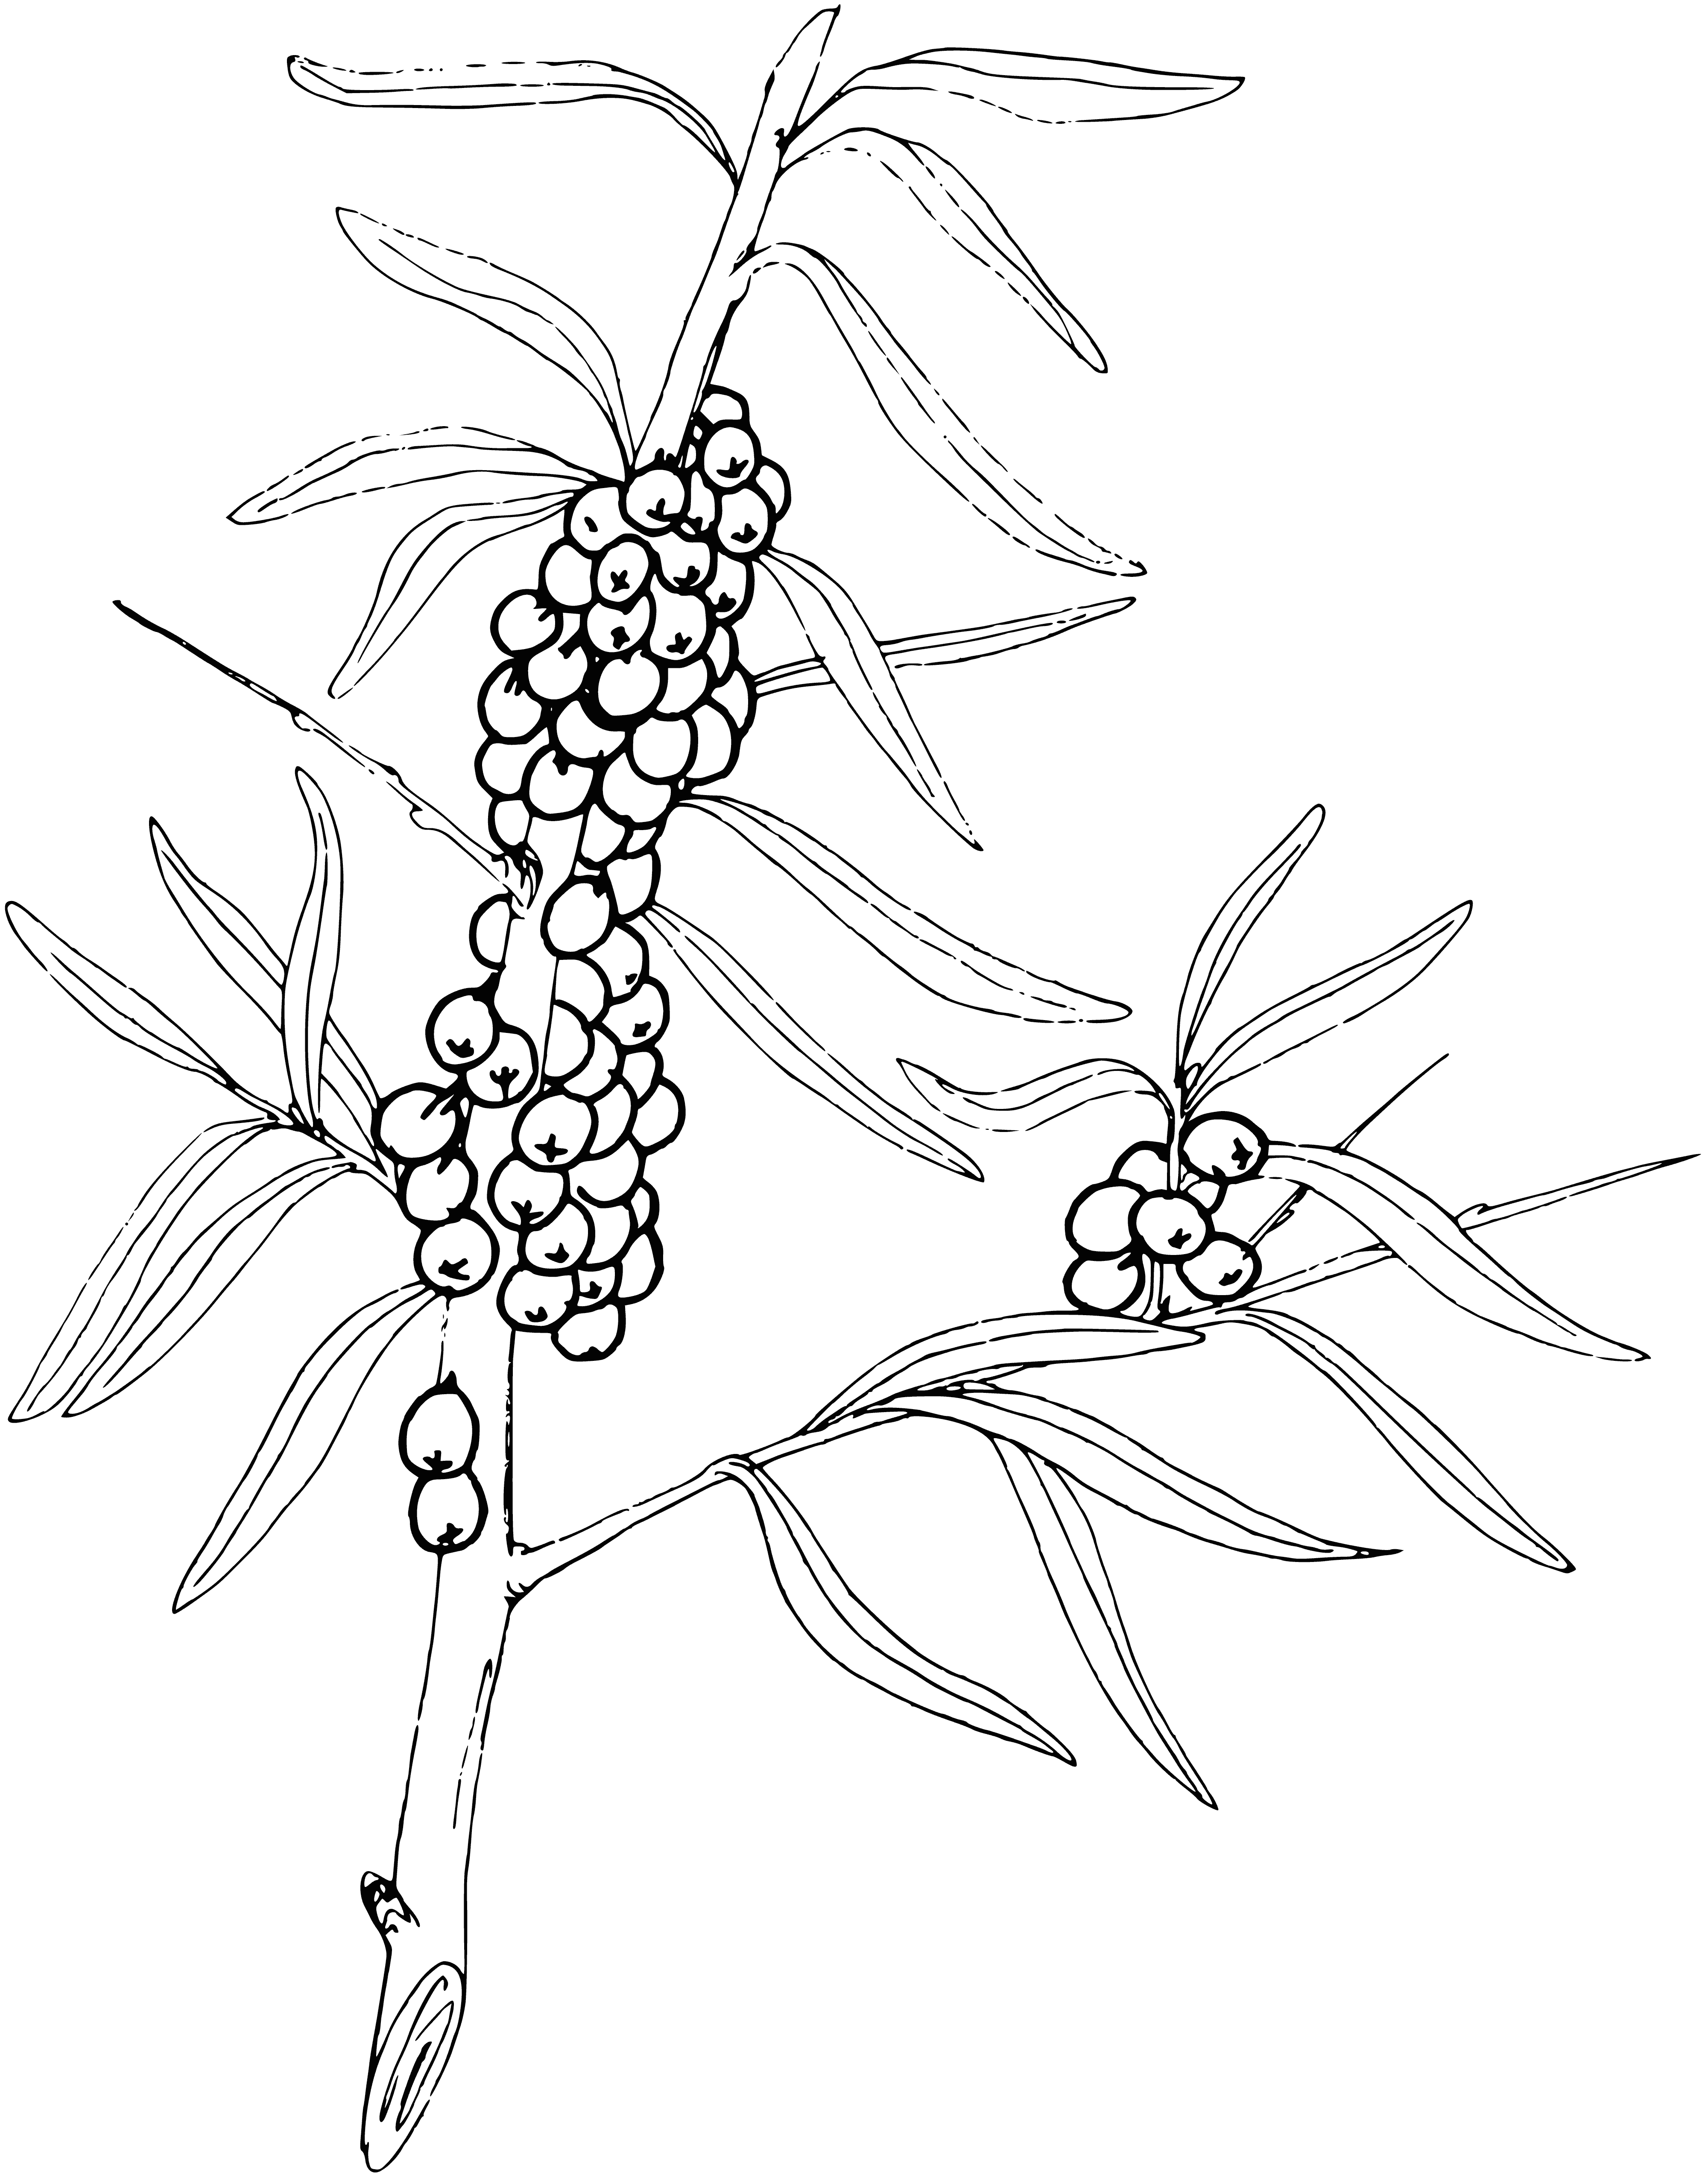 coloring page: A bunch of bright orange berries hang off a thin branch with lots of leaves. They're round with a small point on top. #berries #coloringpage